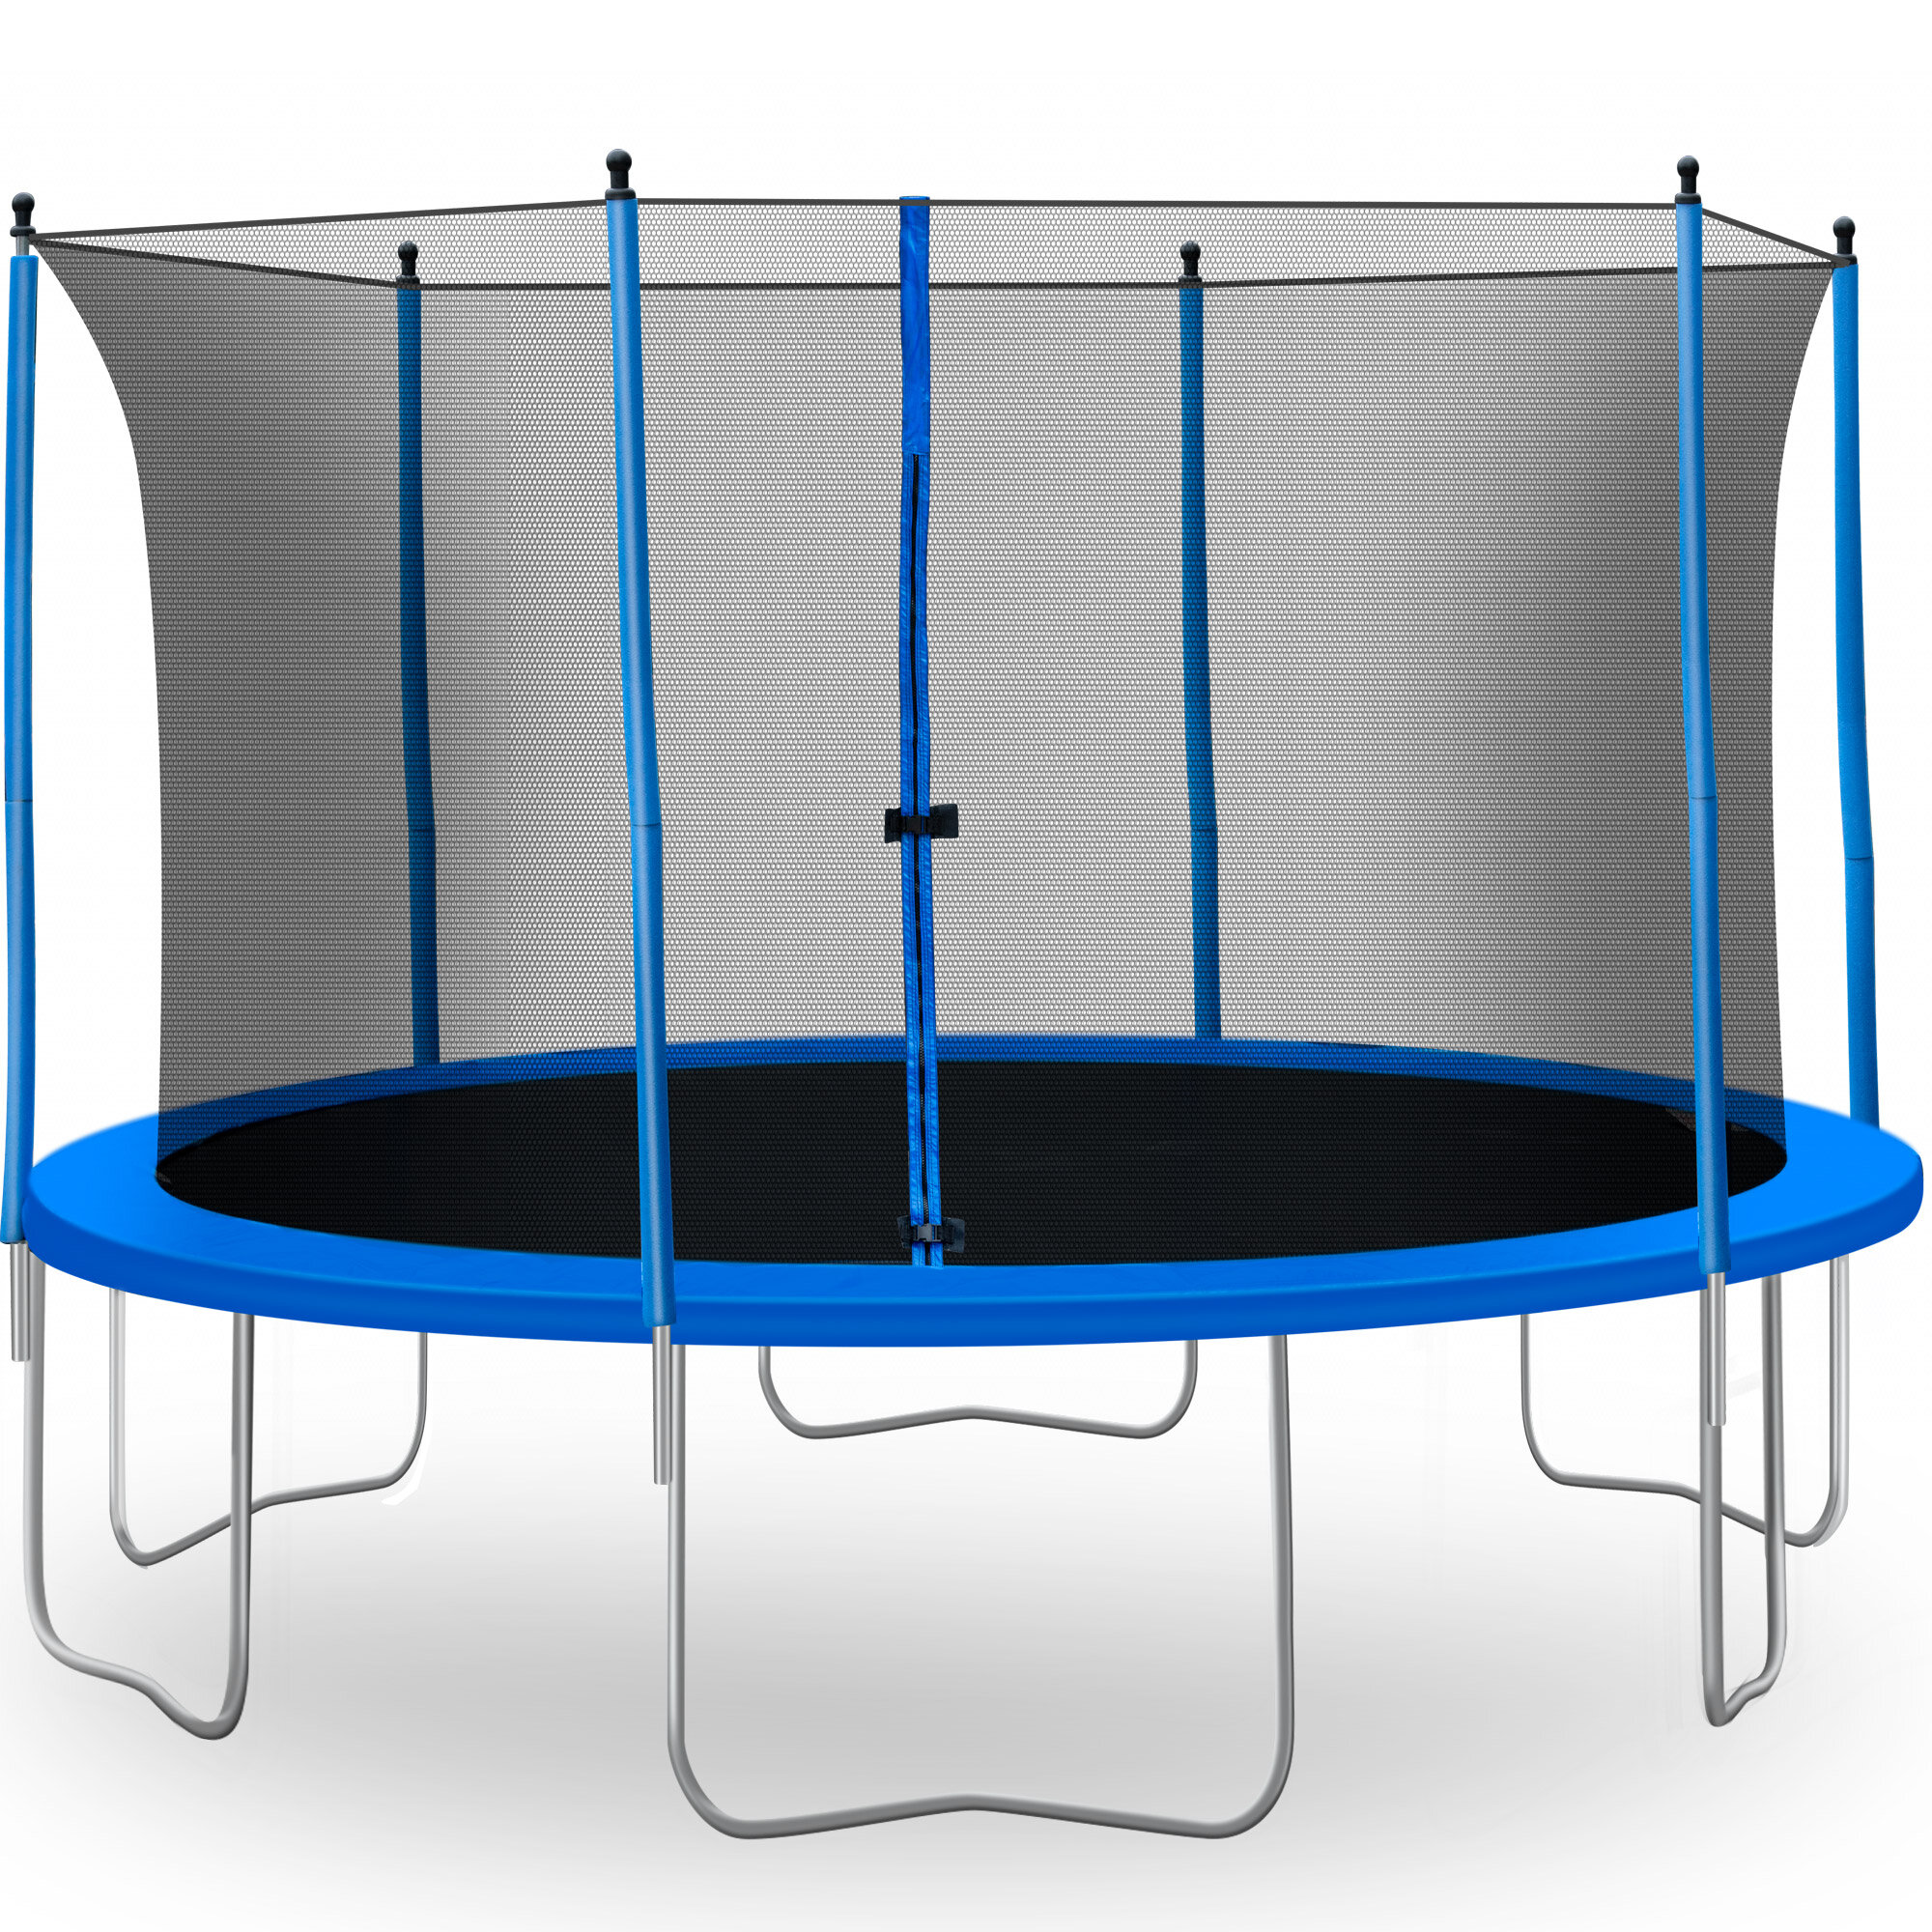 Image of [USA Direct] 13FT Trampoline Jumping Bed Bungee Fitness Equipment with Safety Protective Net Max Load 330lbs